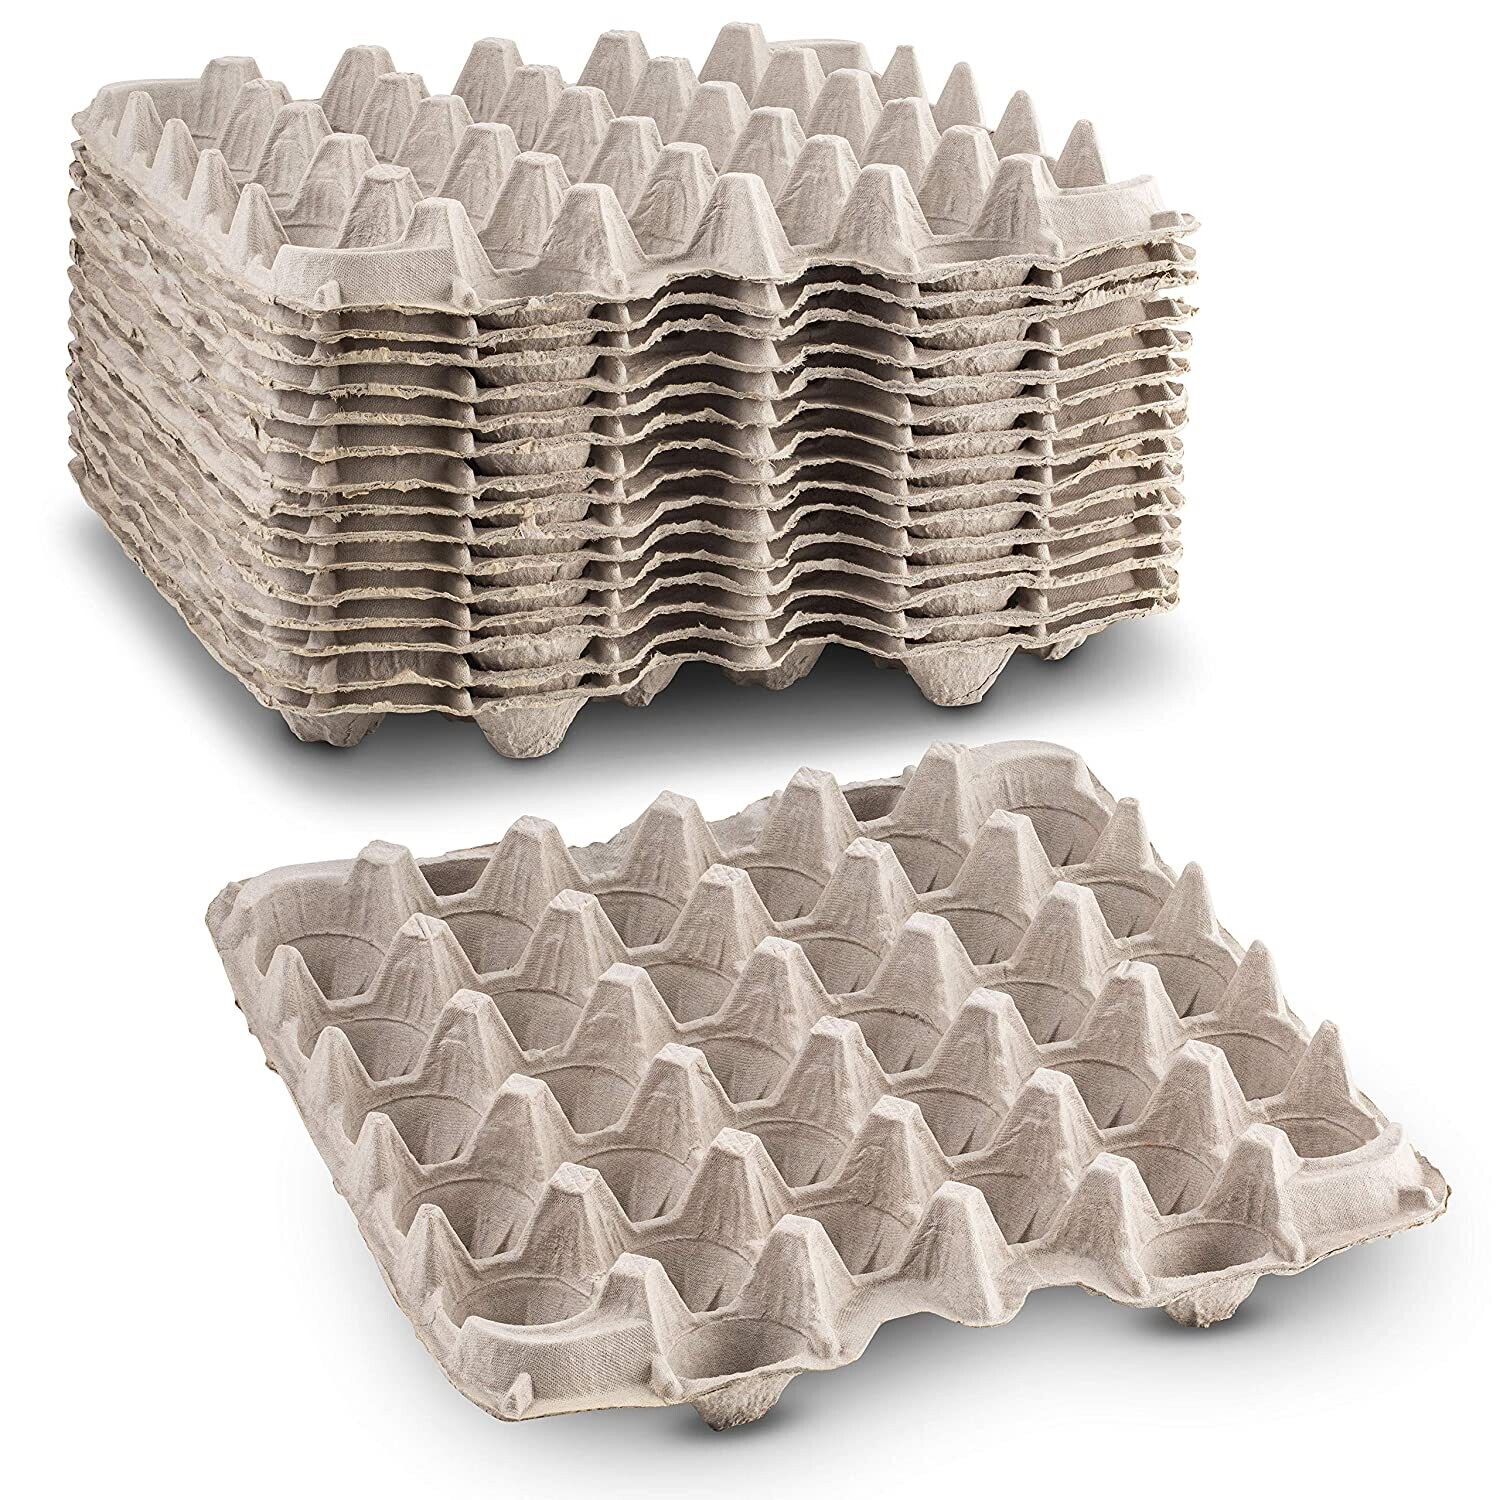 Biodegradable Pulp Fiber Egg Tray Flats for Roach or Cricket Colony [20 PACK]